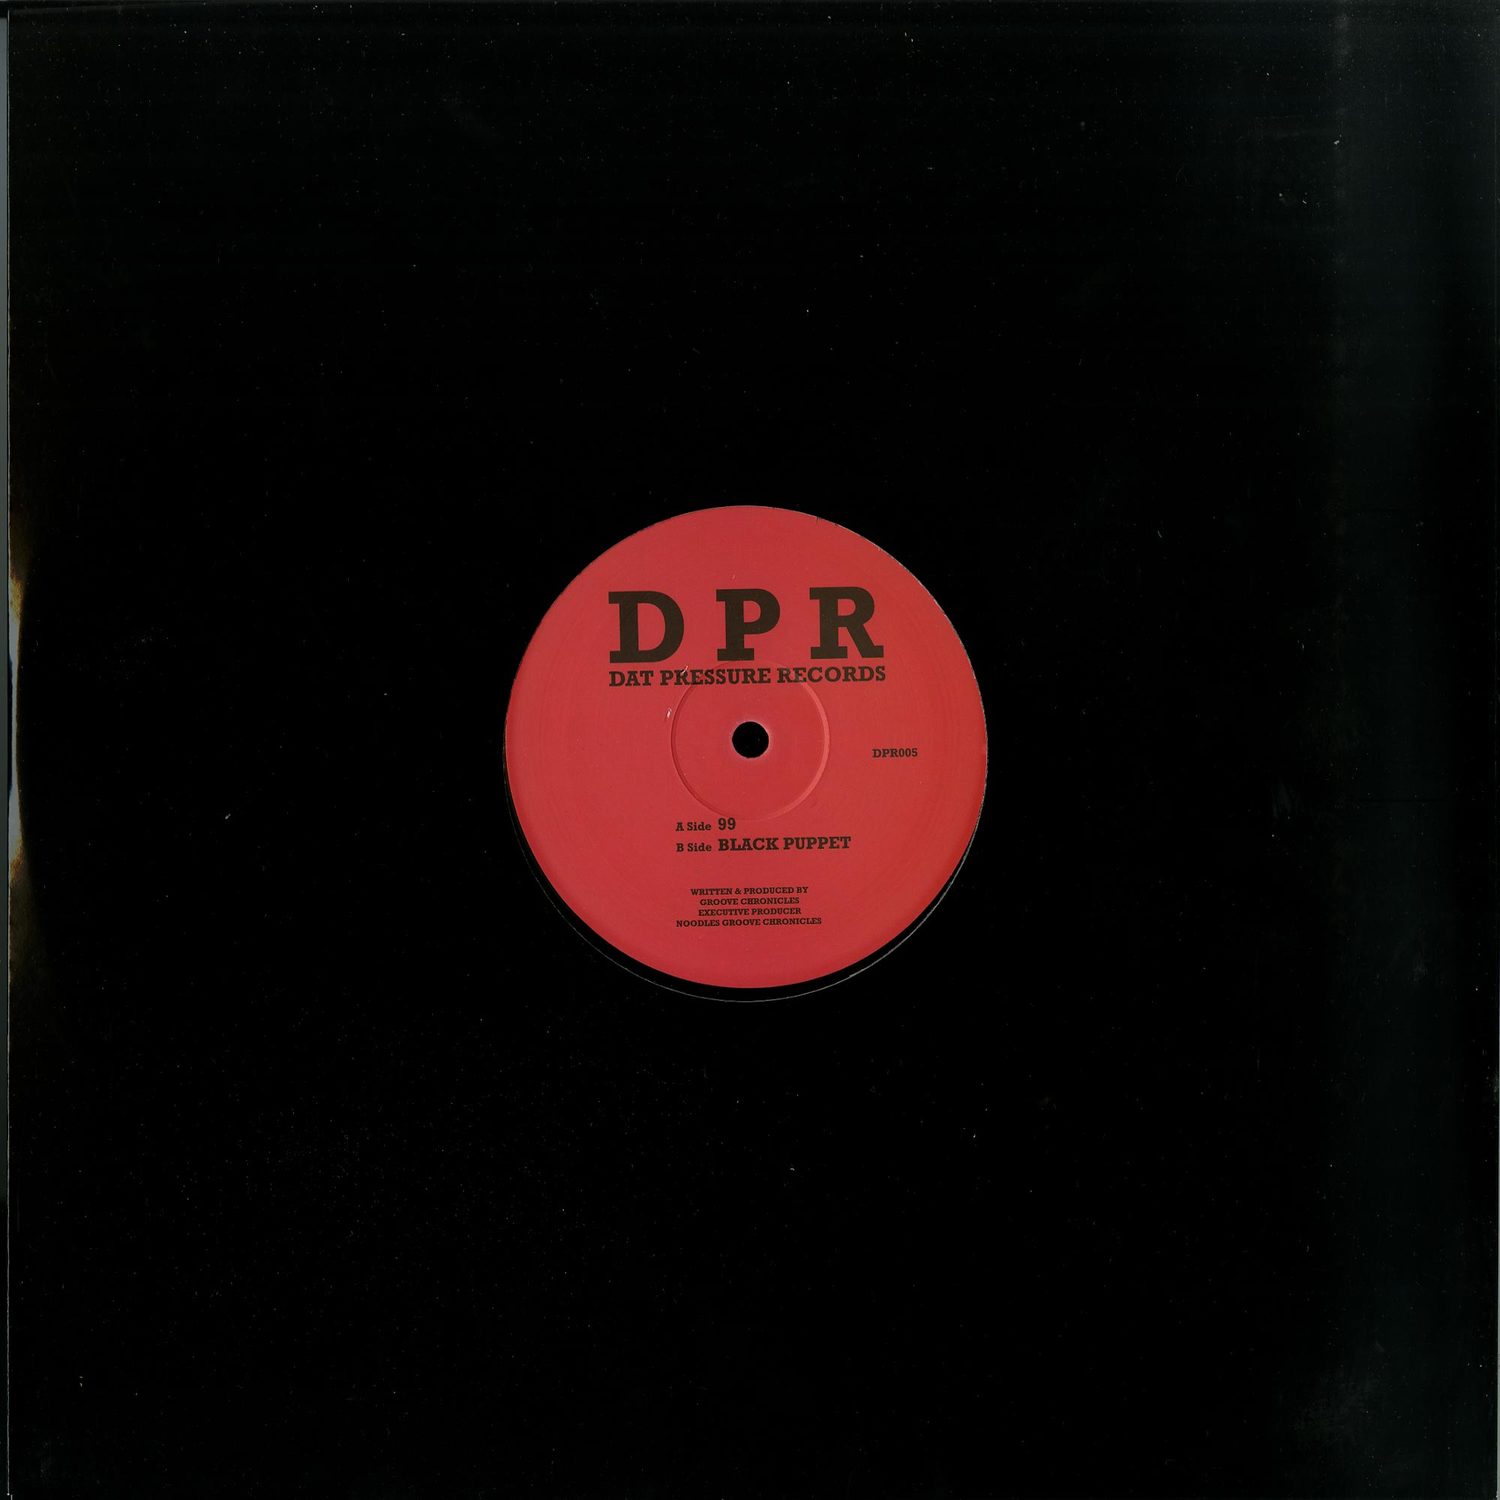 Noodles Groovechronicles - DPR 005 